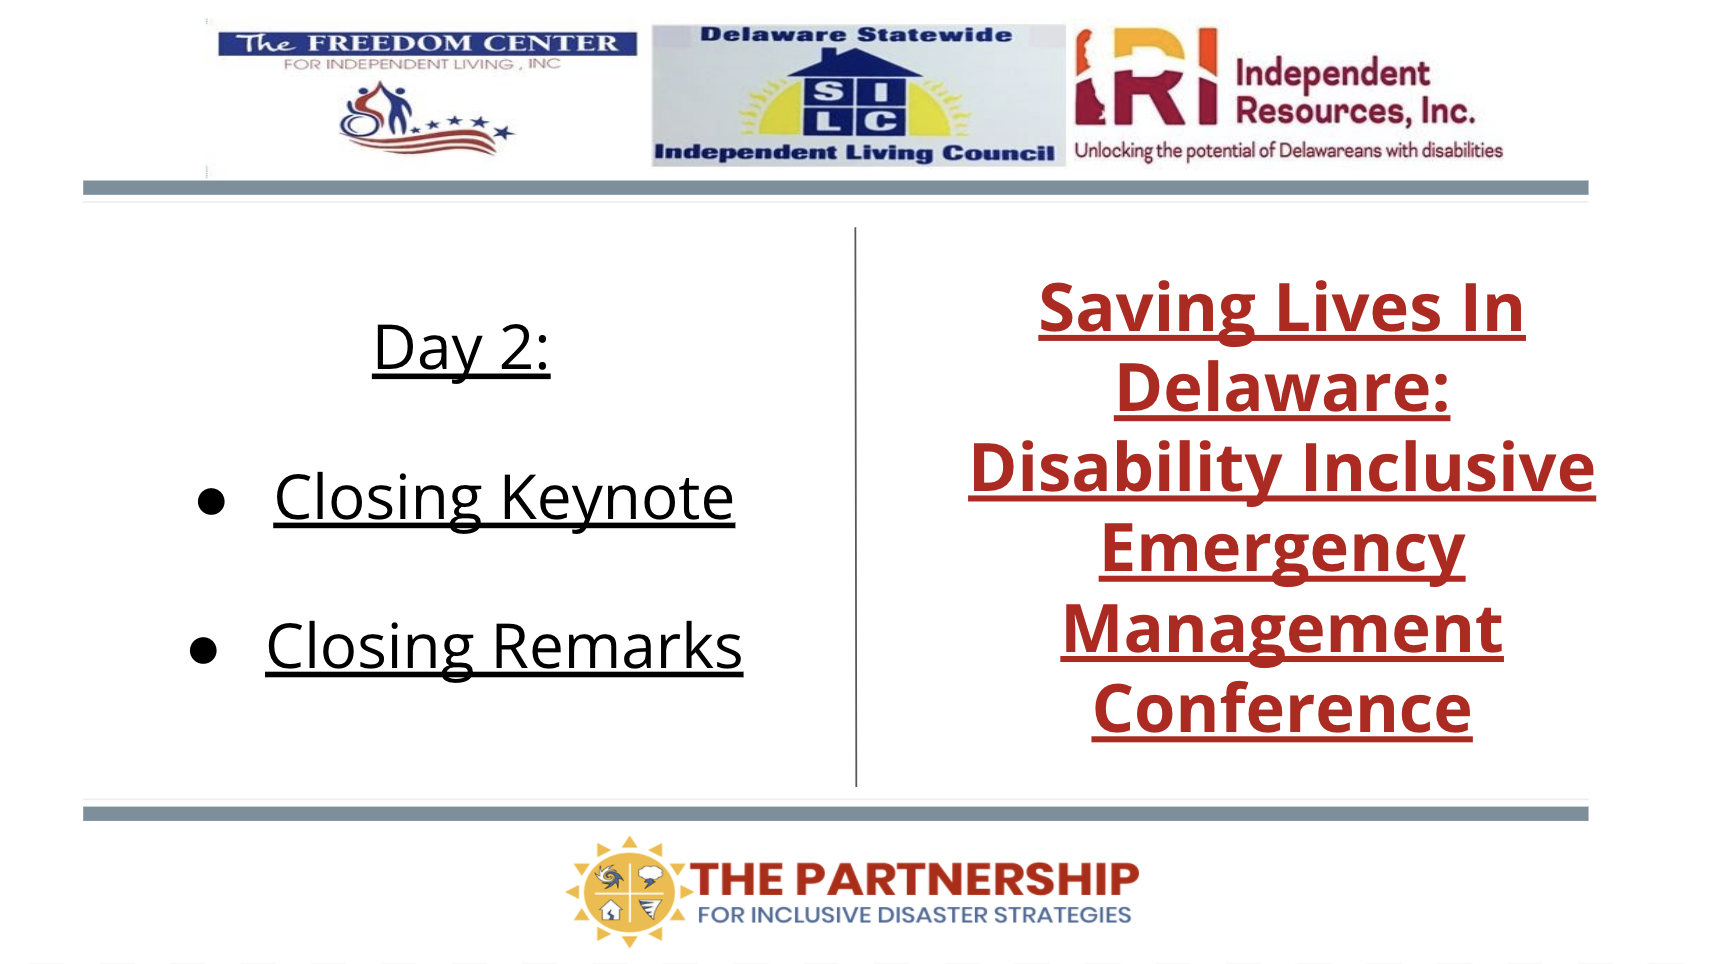 Image with the logos of The Partnership, FCIL, DE SILC, and IRI. Text reads "Day 2. Closing Keynote. Closing Remarks."